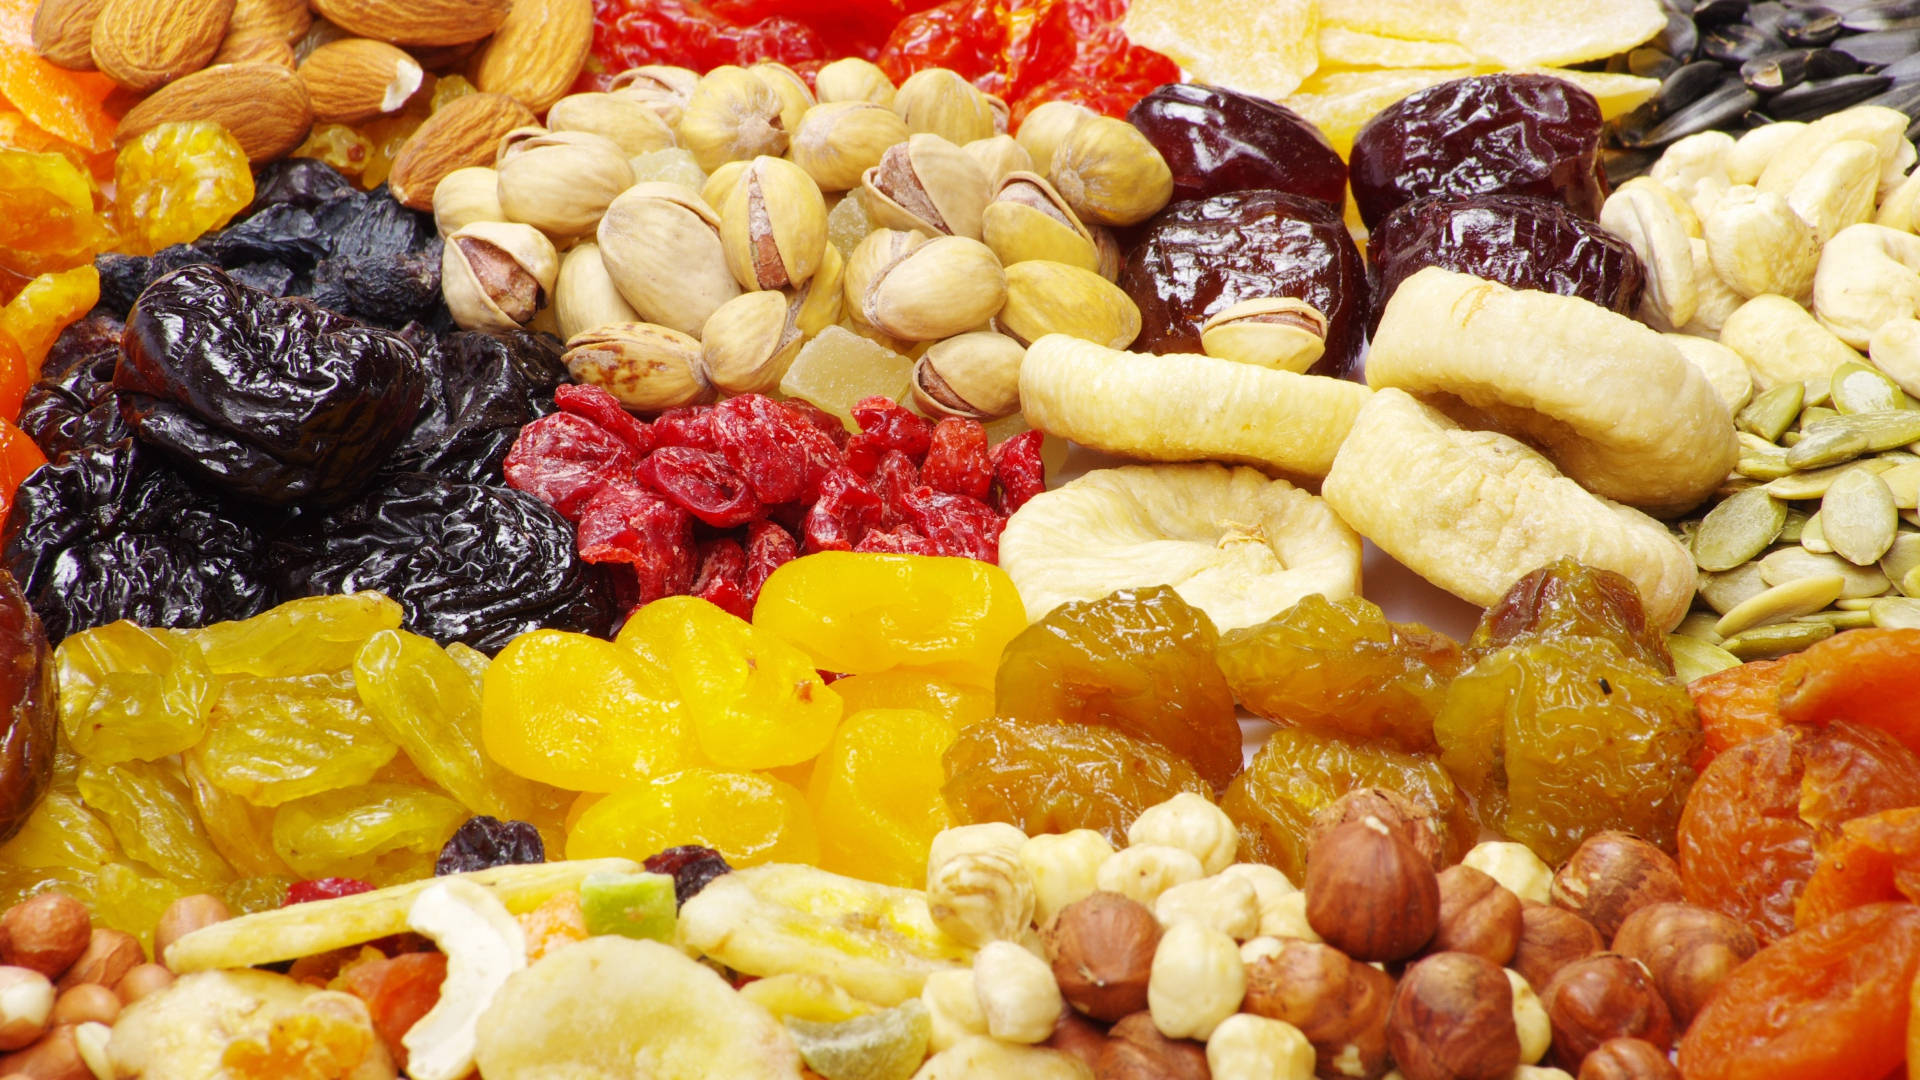 Mixed Dried Fruits And Nuts Currant Wallpaper